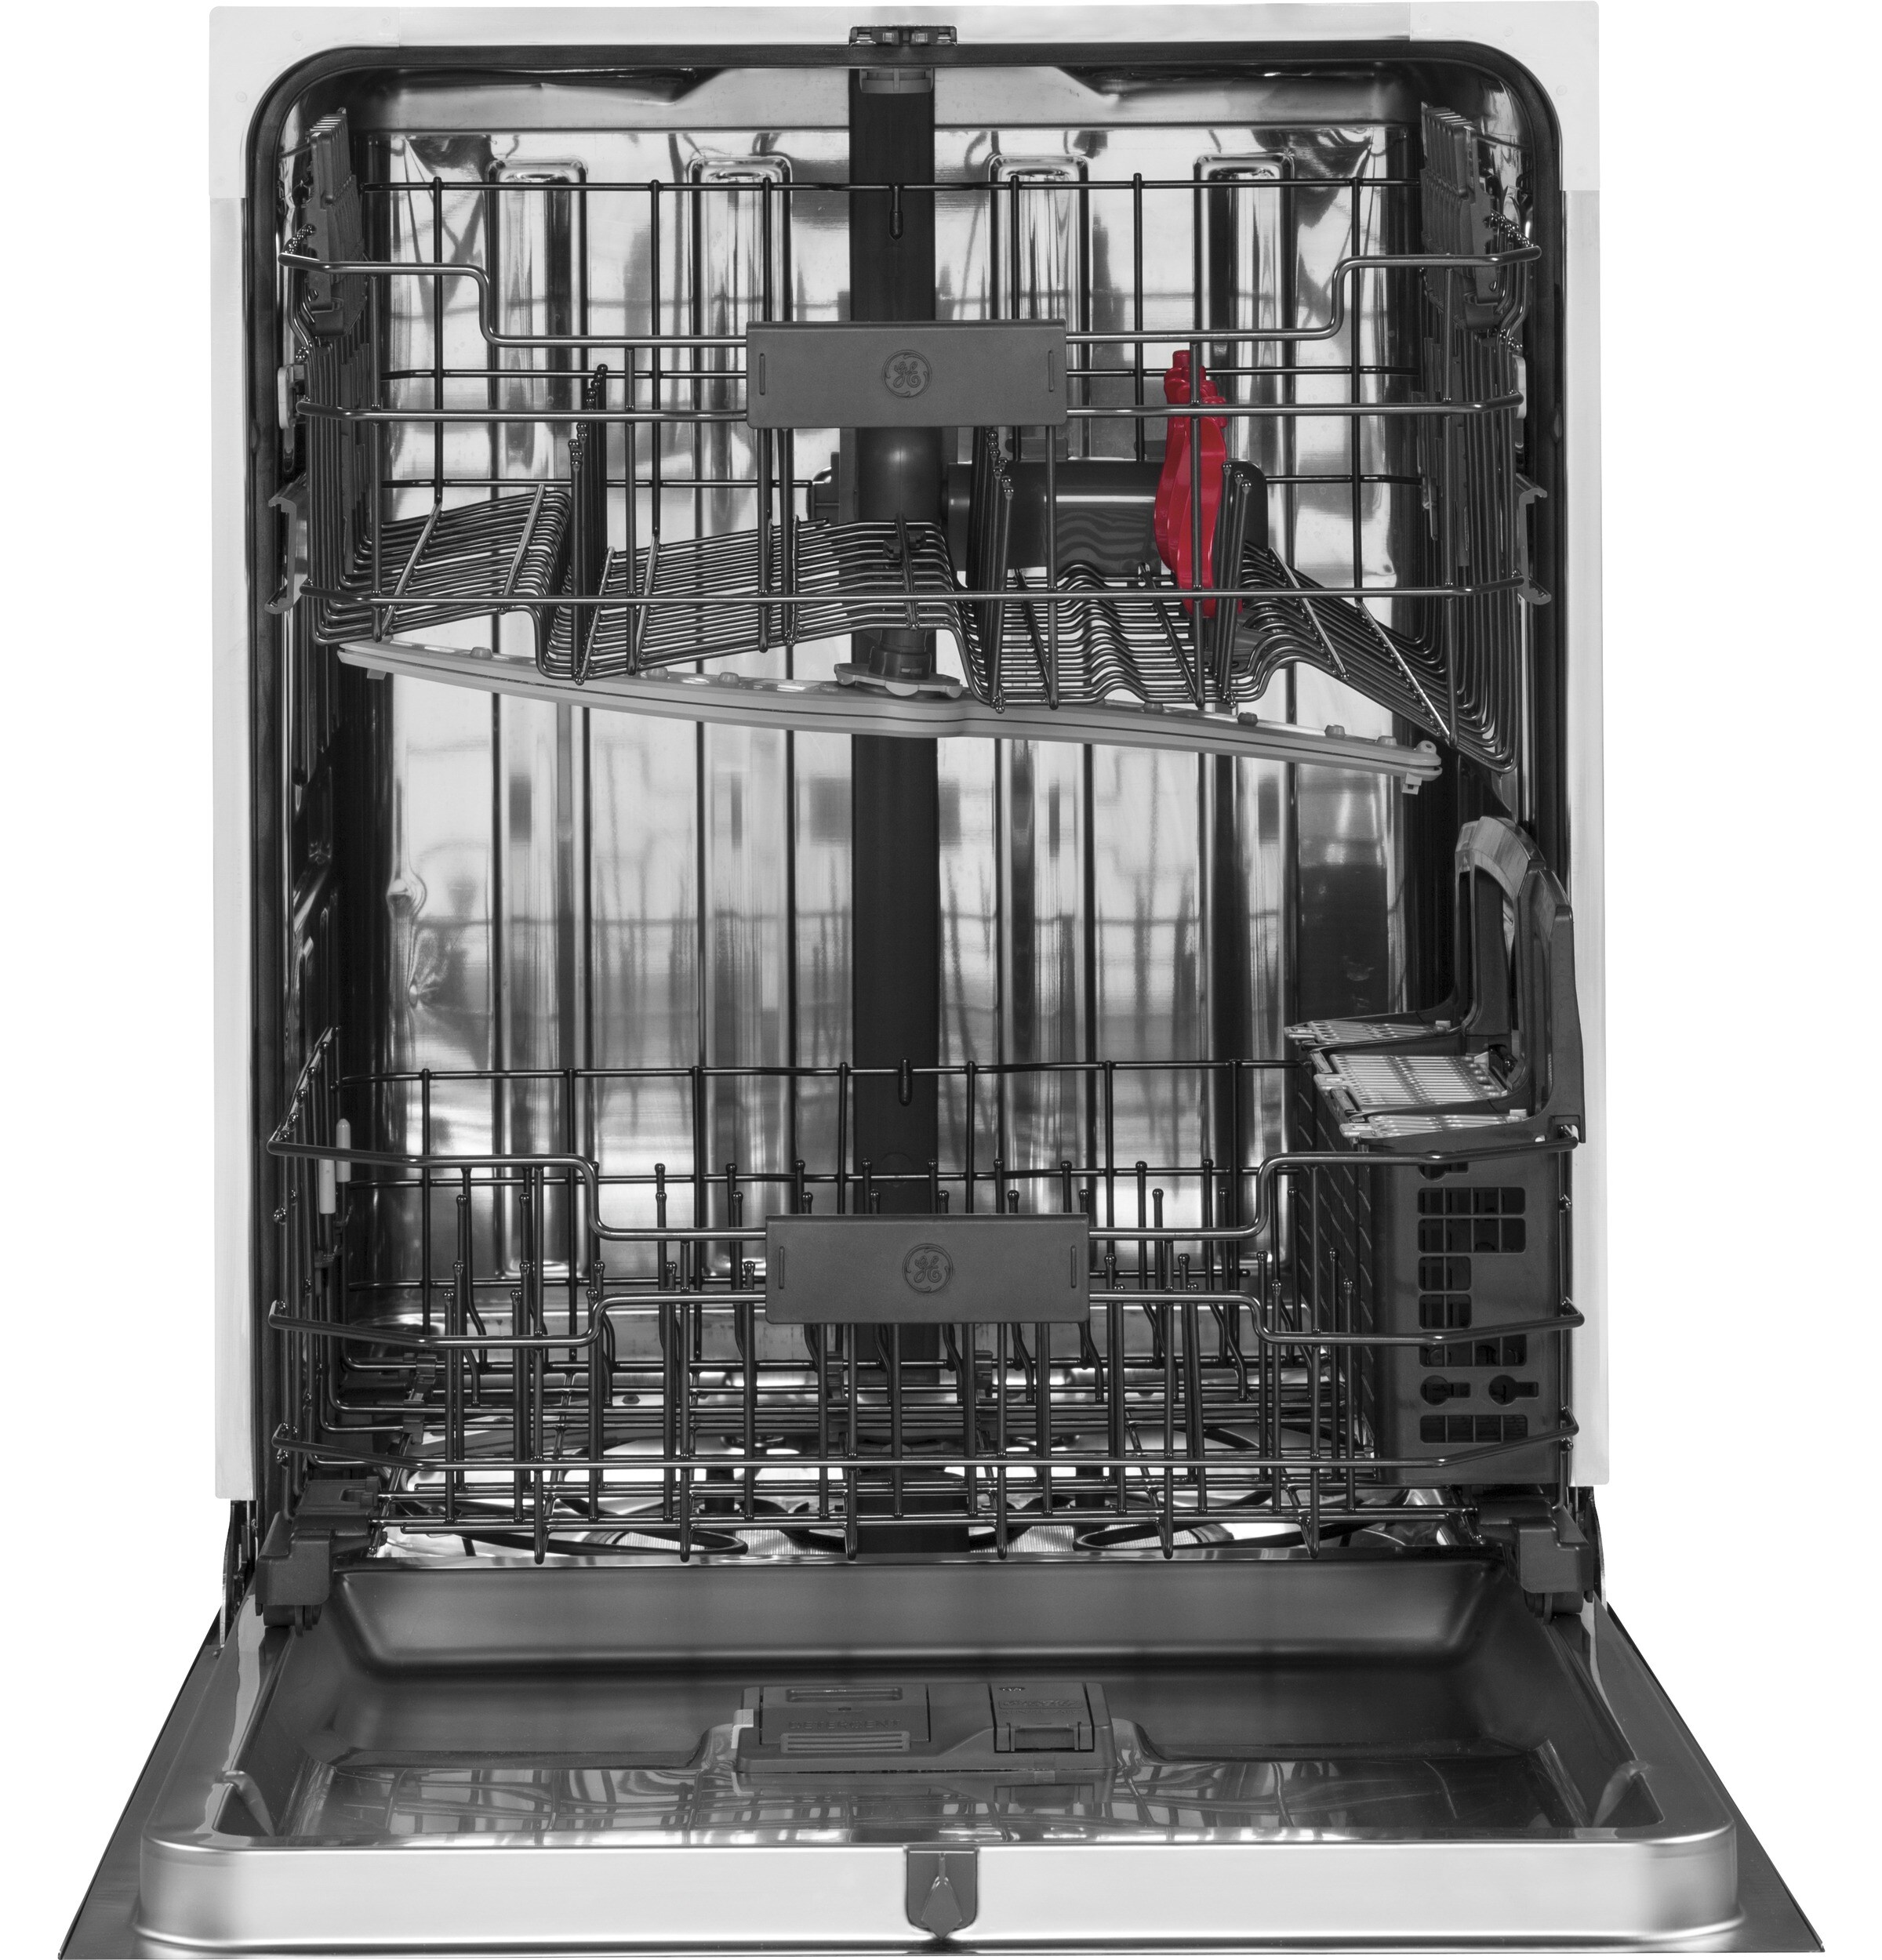 GDF650SFJDS by GE Appliances - GE® Stainless Steel Interior Dishwasher with  Front Controls